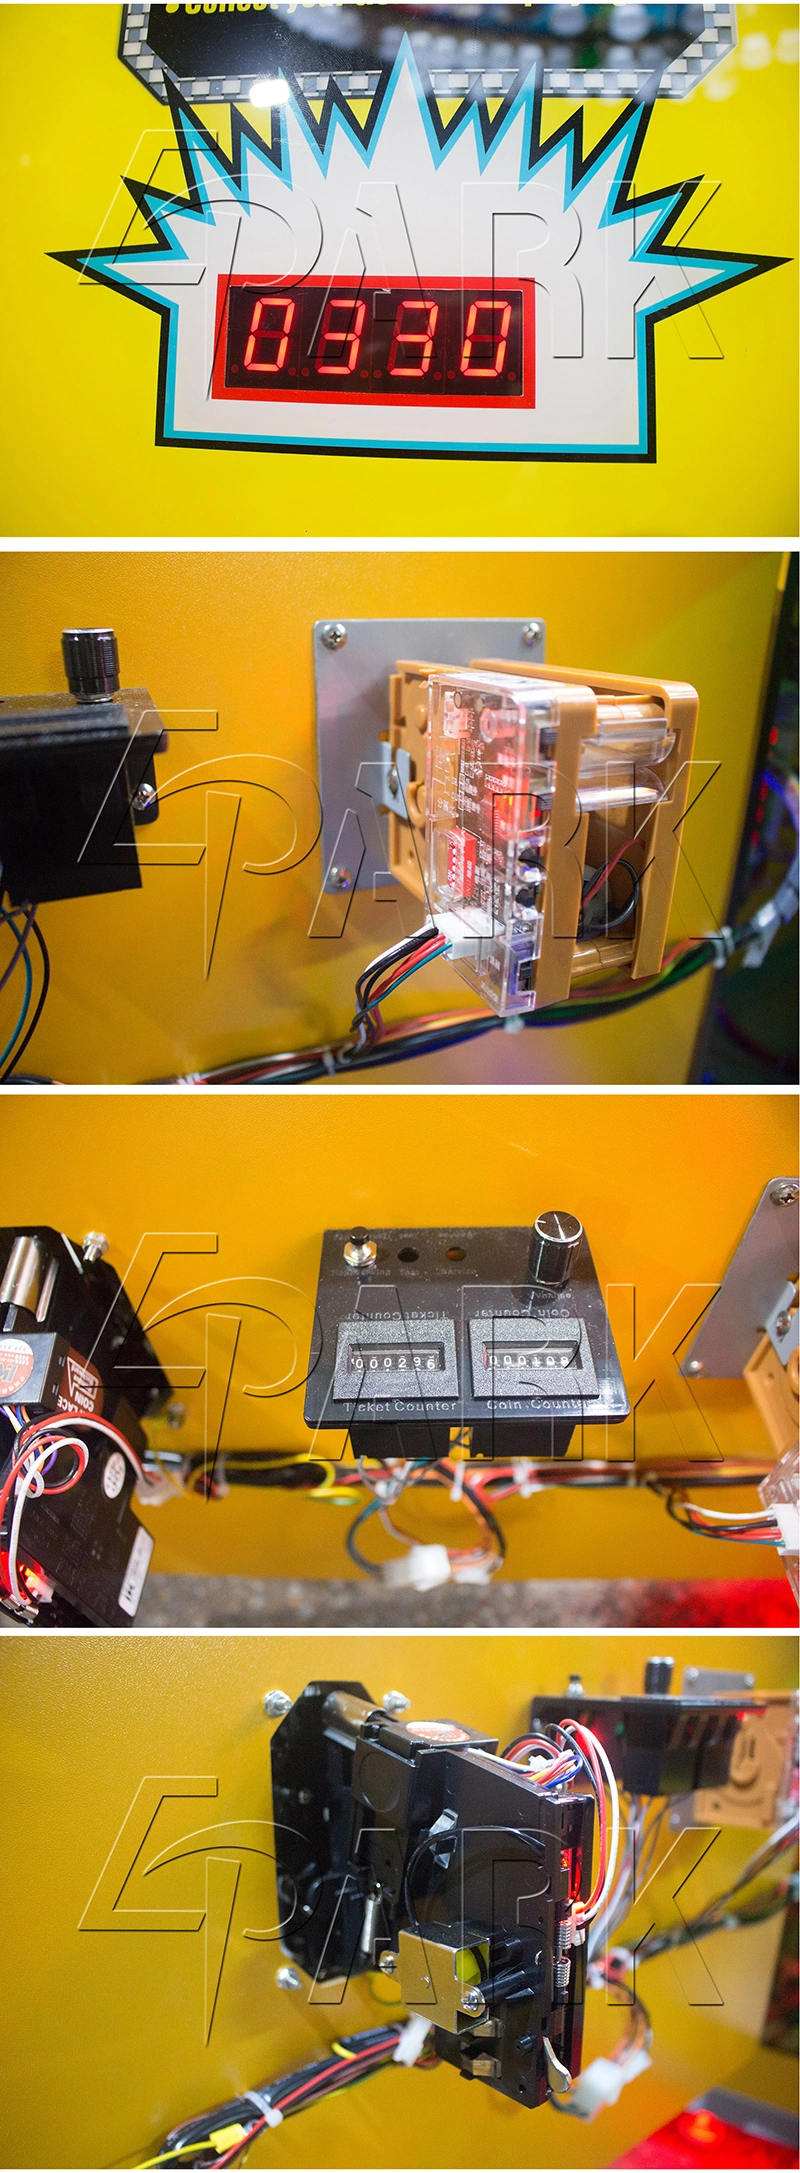 Hot Selling Lottery Arcade Game Machine Spin N Win Prize Arcade Redemption Game Machine